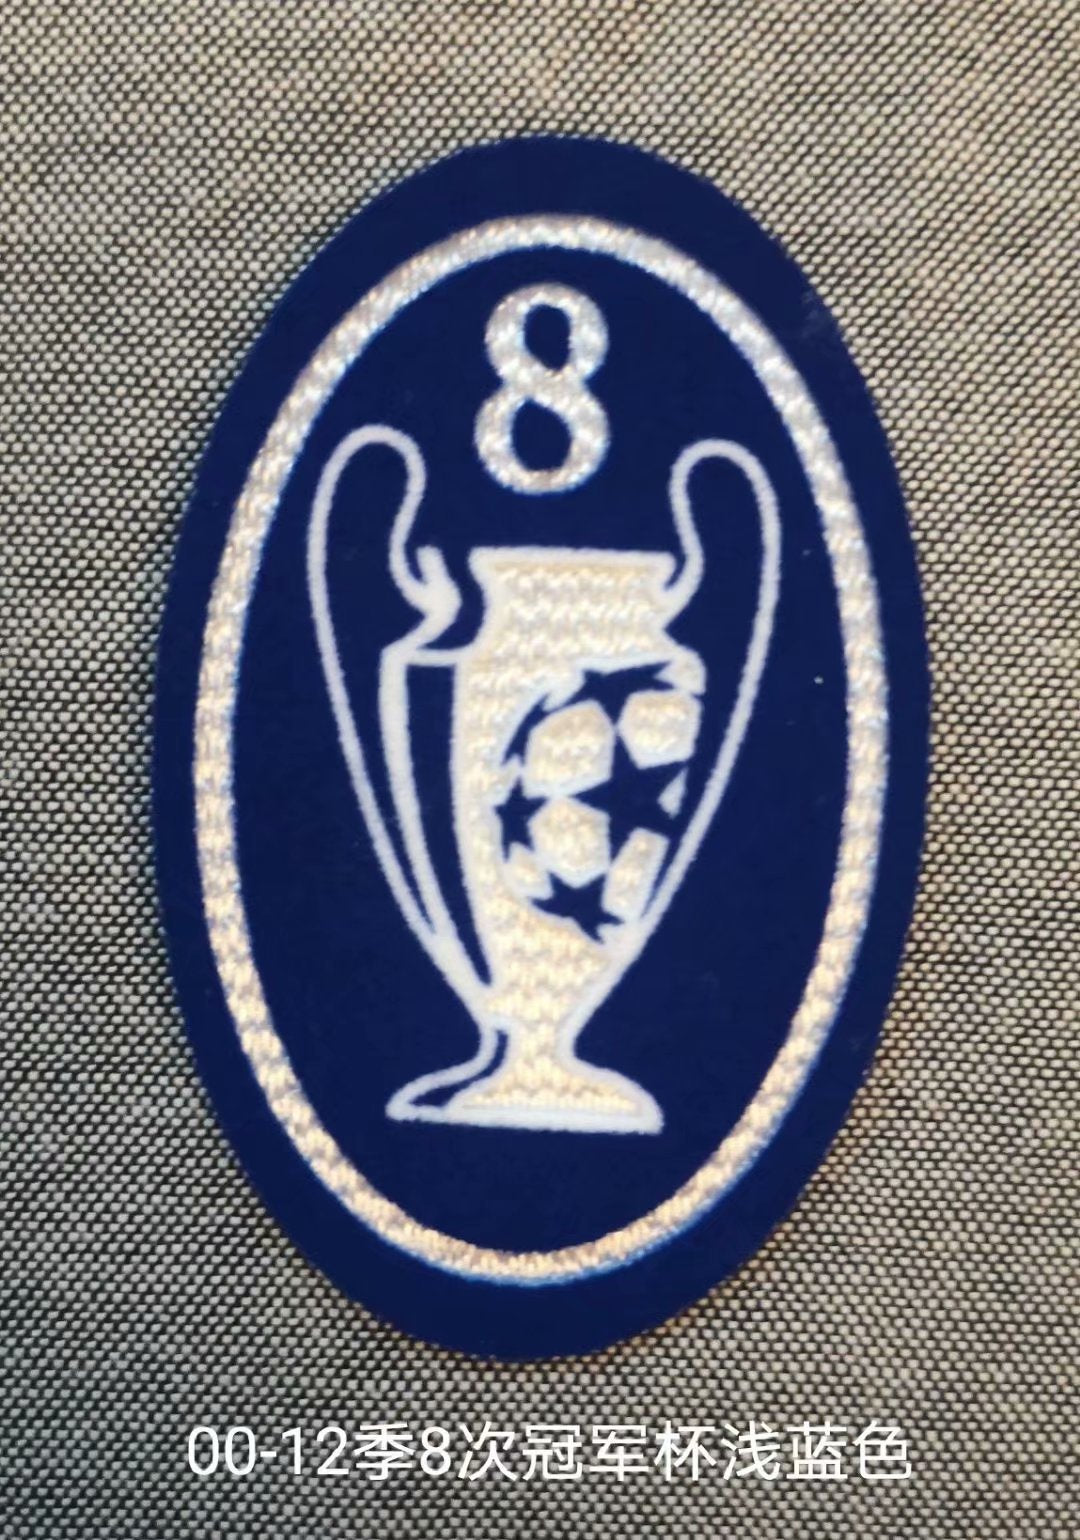 UEFA Badge Of Honour 8 Times Champions League Winner Patch